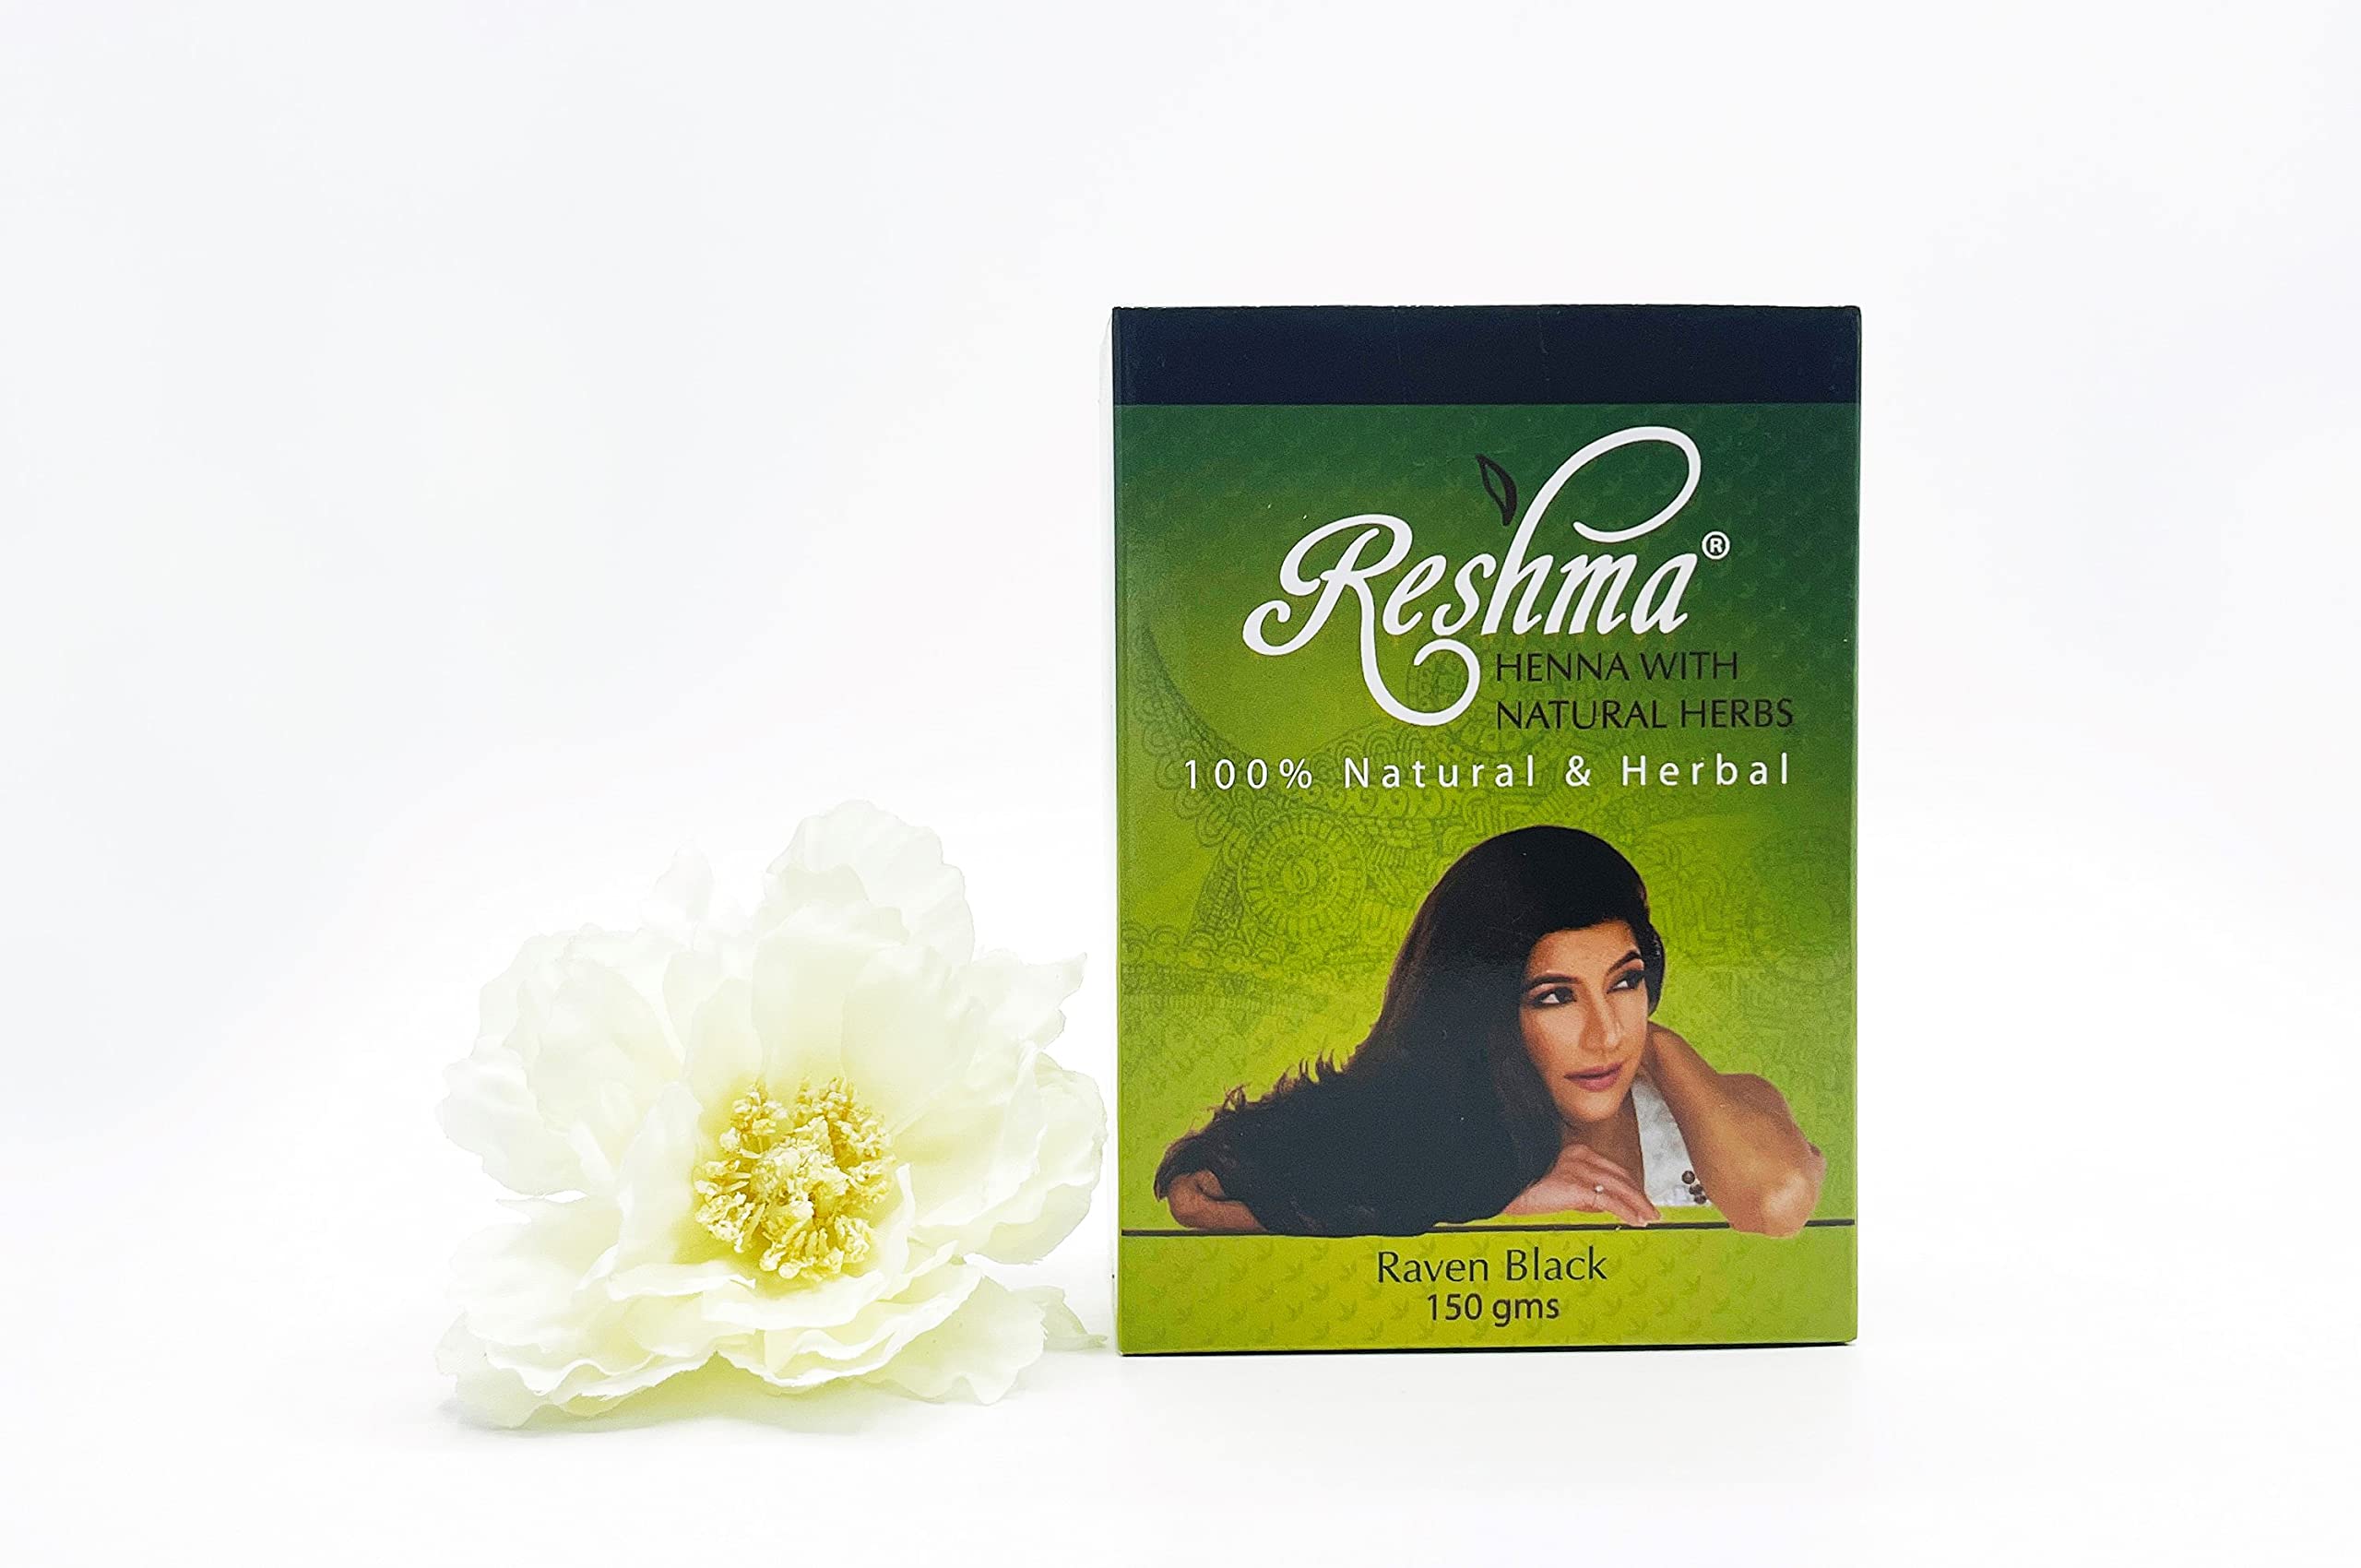 Reshma Beauty Henna Hair Color Pure Natural & Organic Dye with Goodness of Herbs (Raven Black, Pack Of 12)